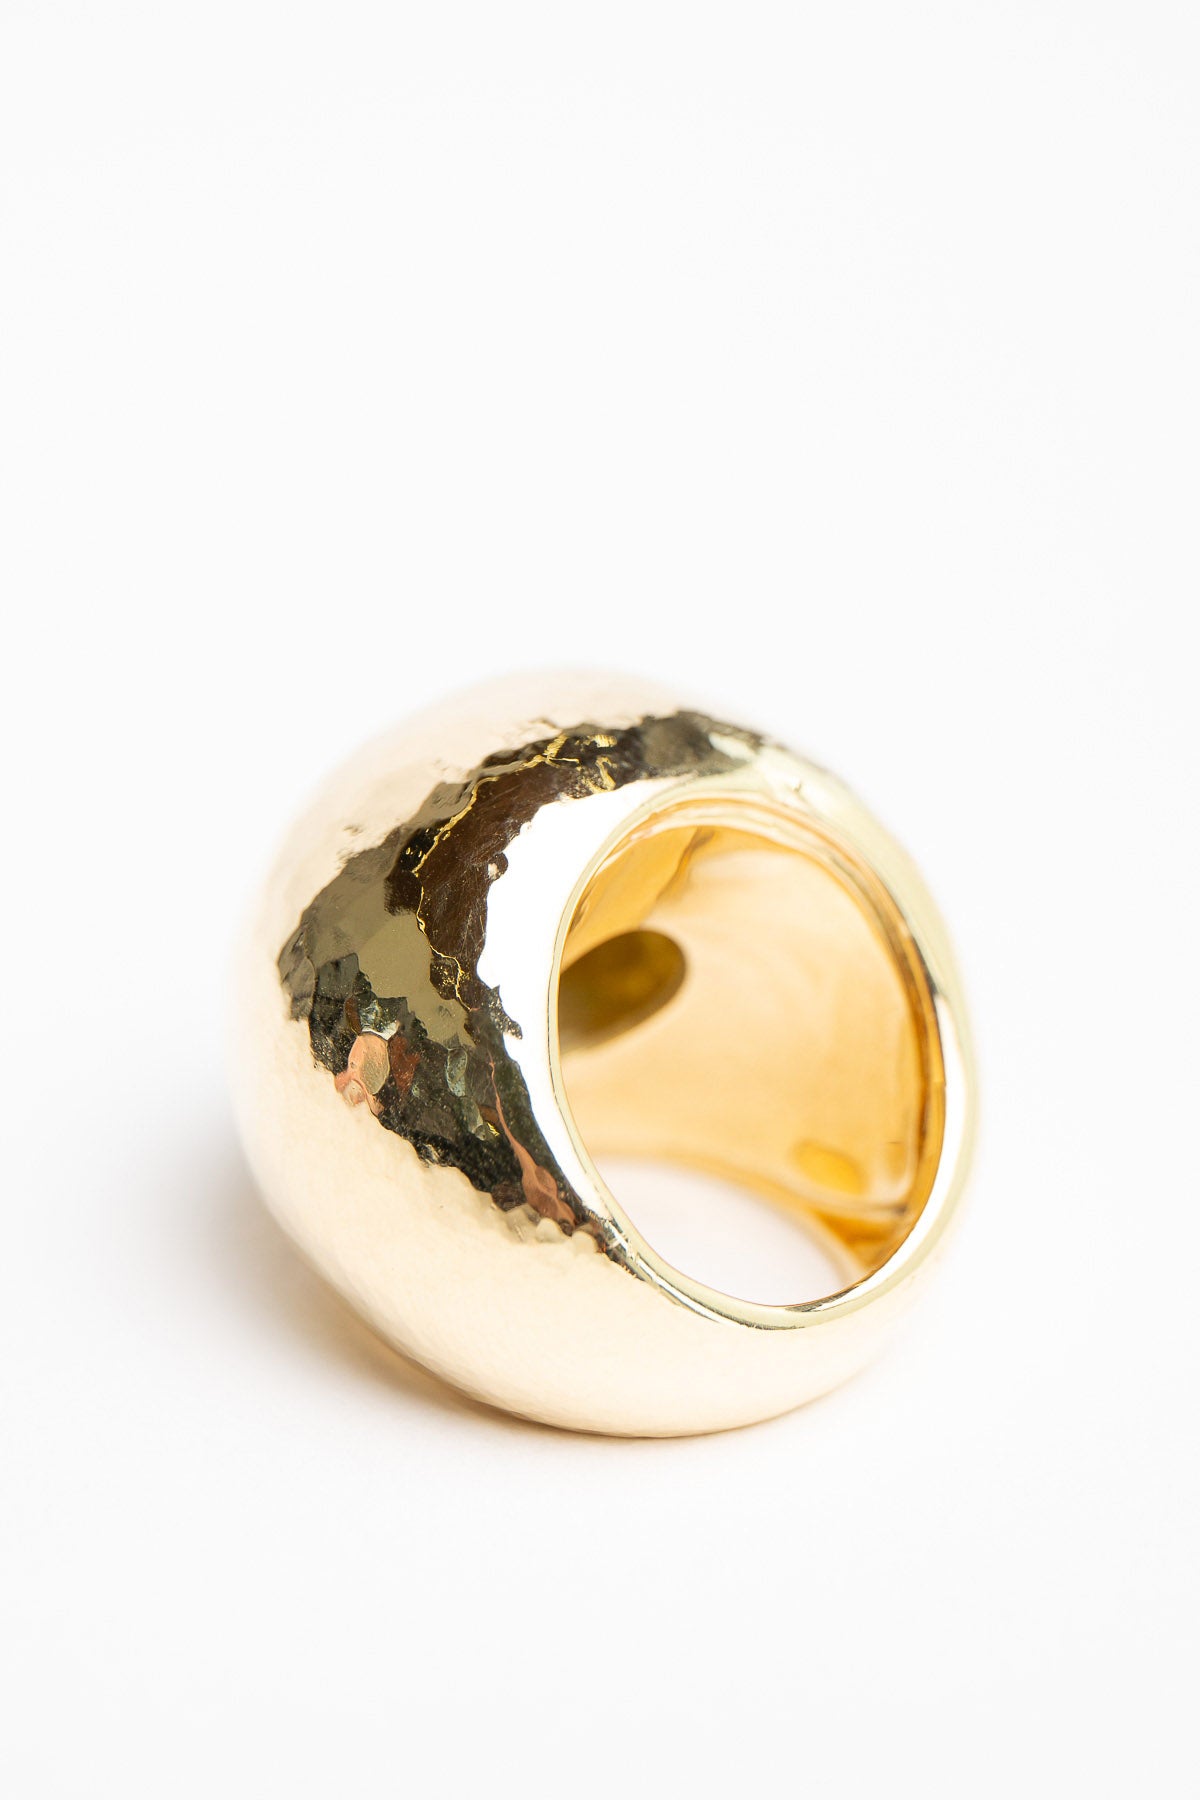 MAUD JEWELRY | 18K GOLD LARGE DOME RING